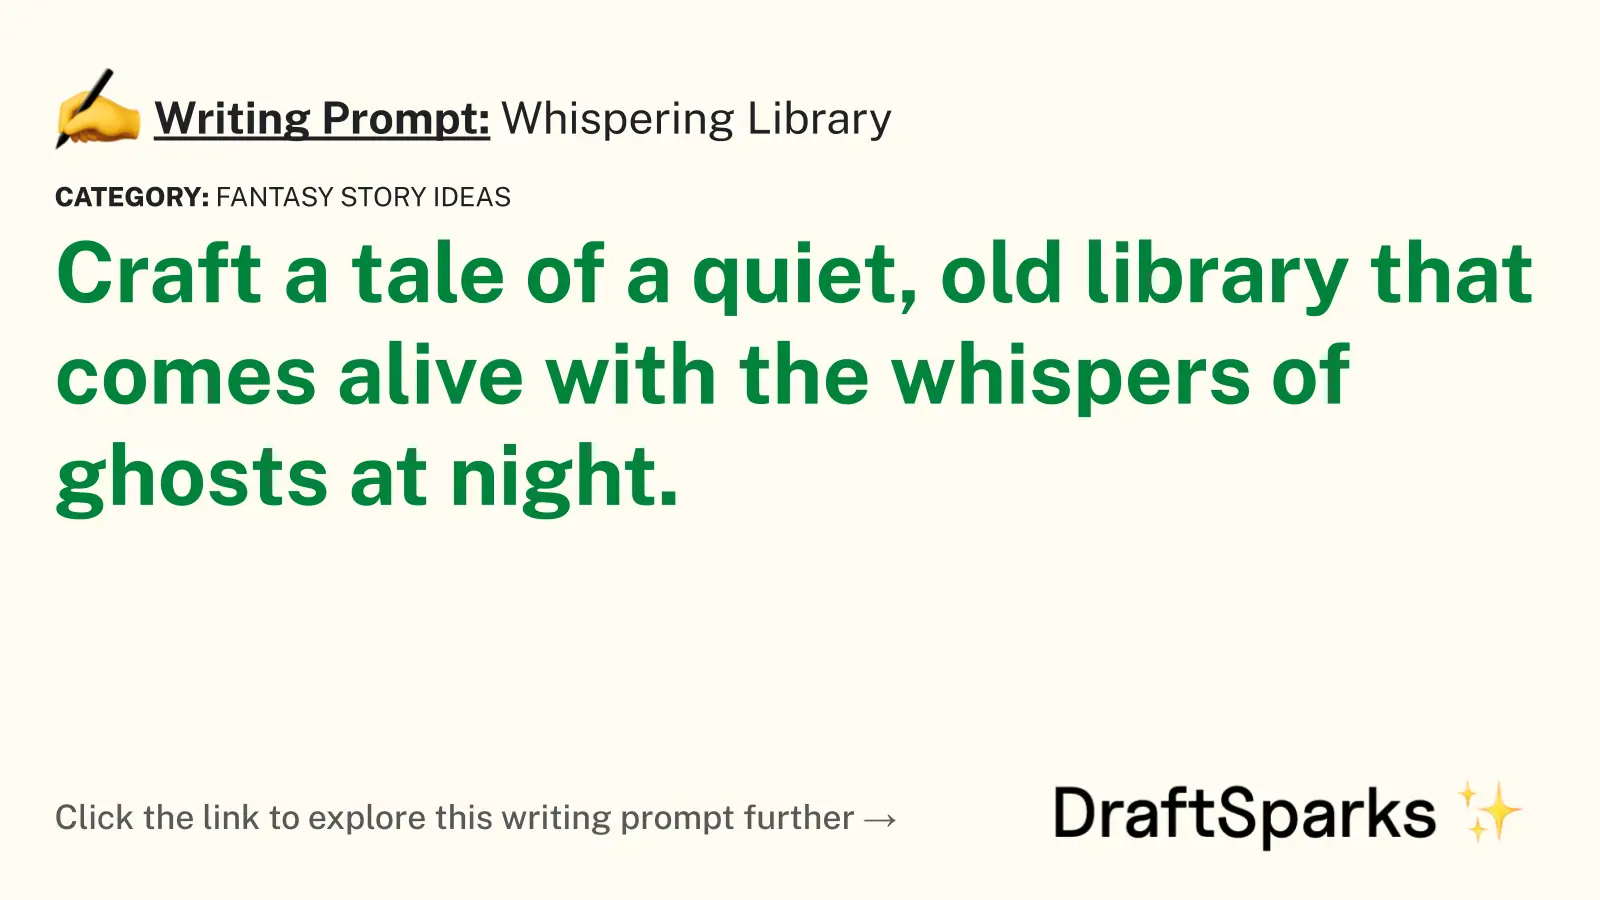 Whispering Library